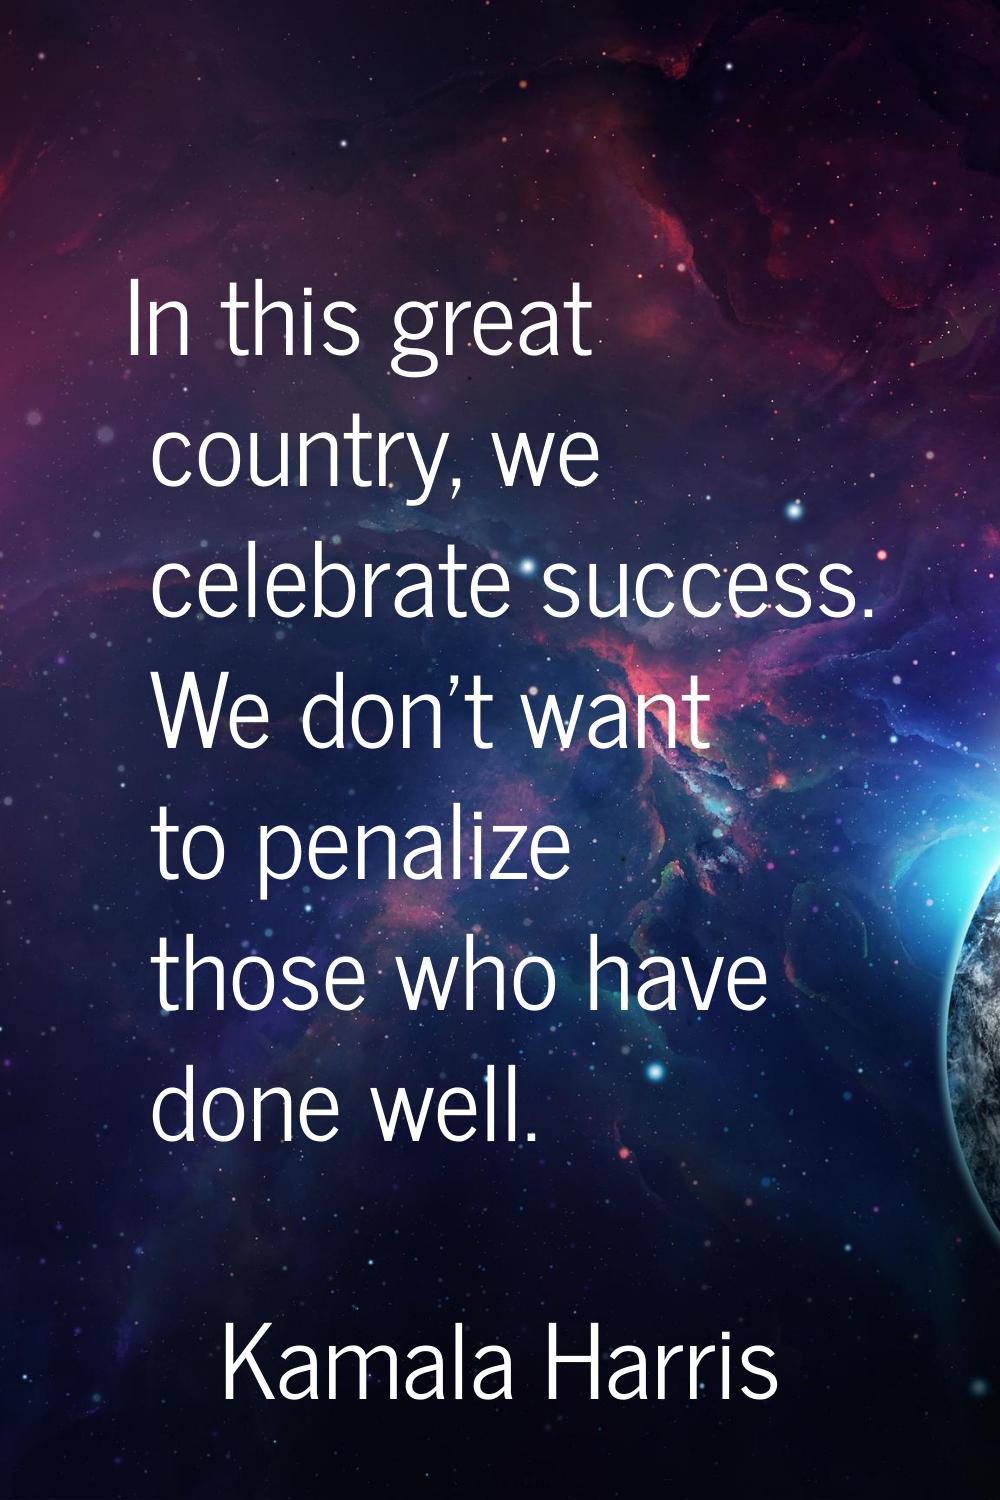 In this great country, we celebrate success. We don't want to penalize those who have done well.